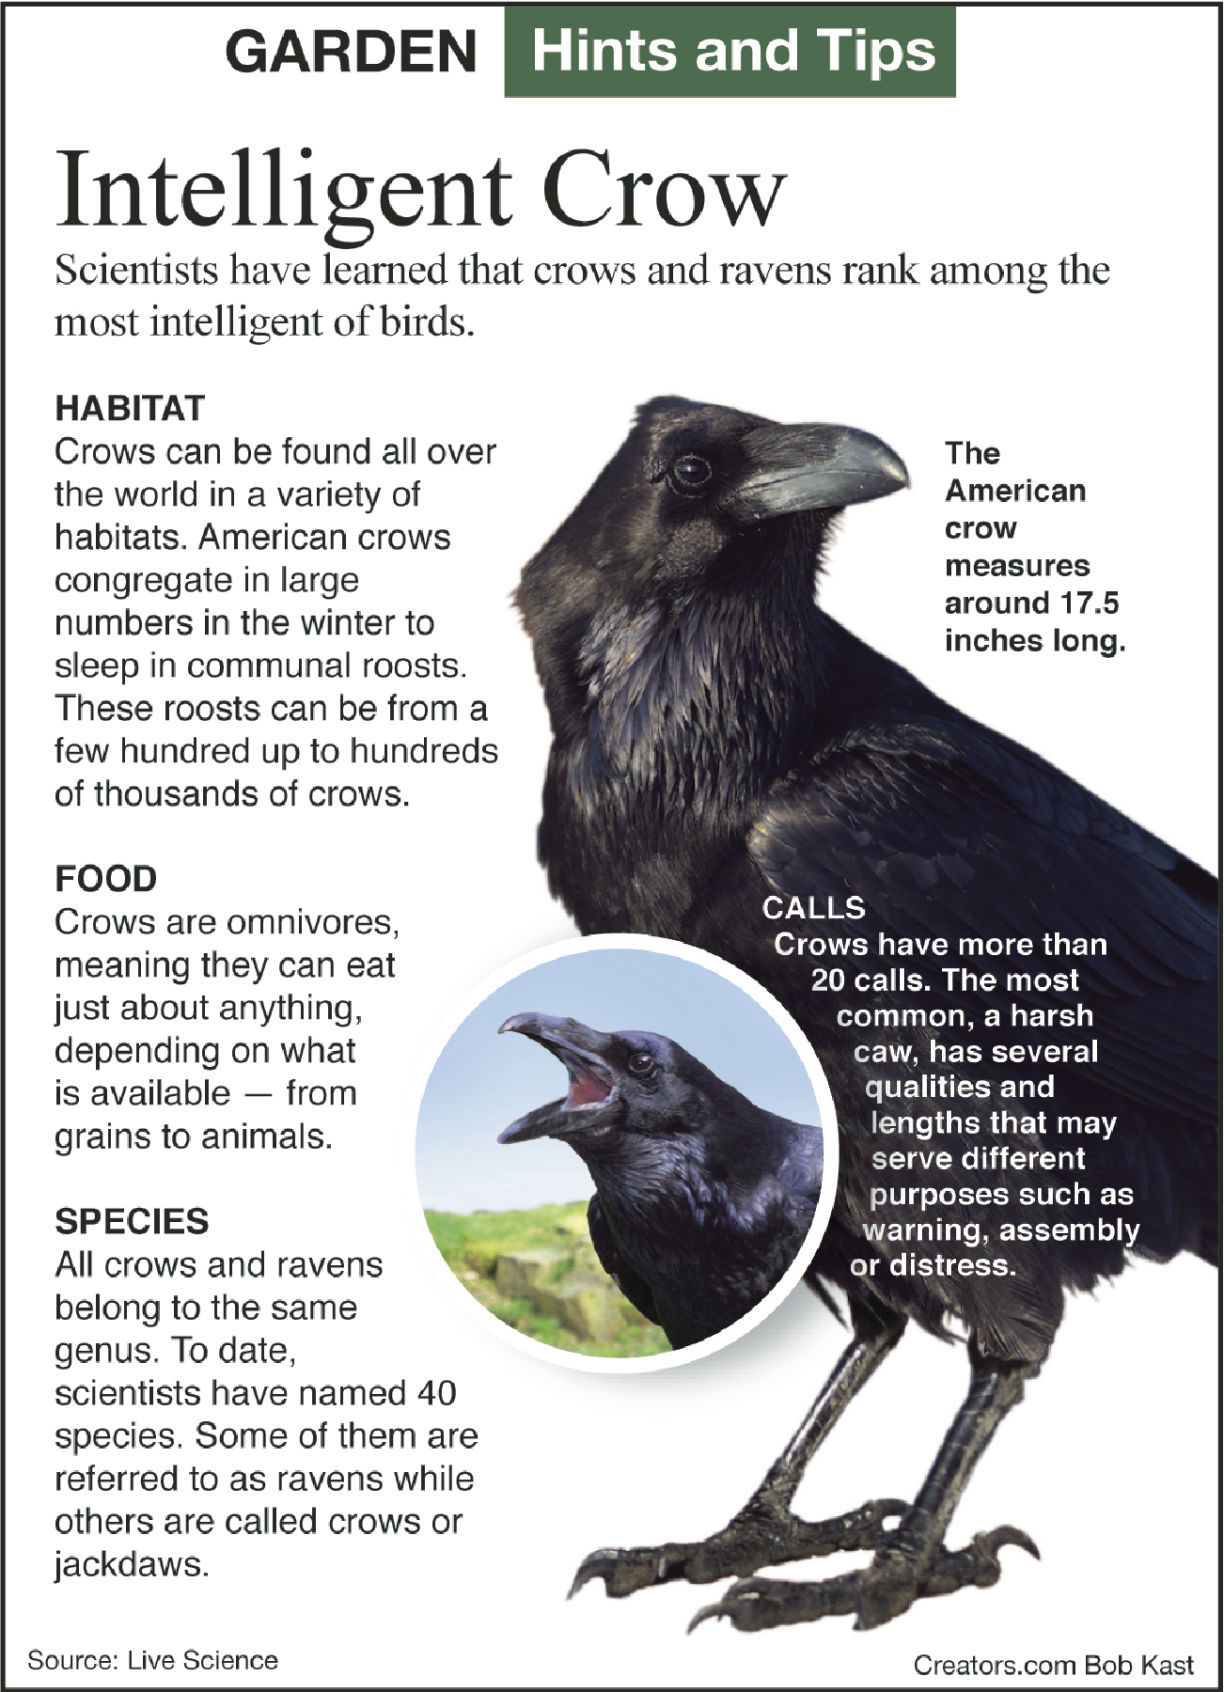 all about crow